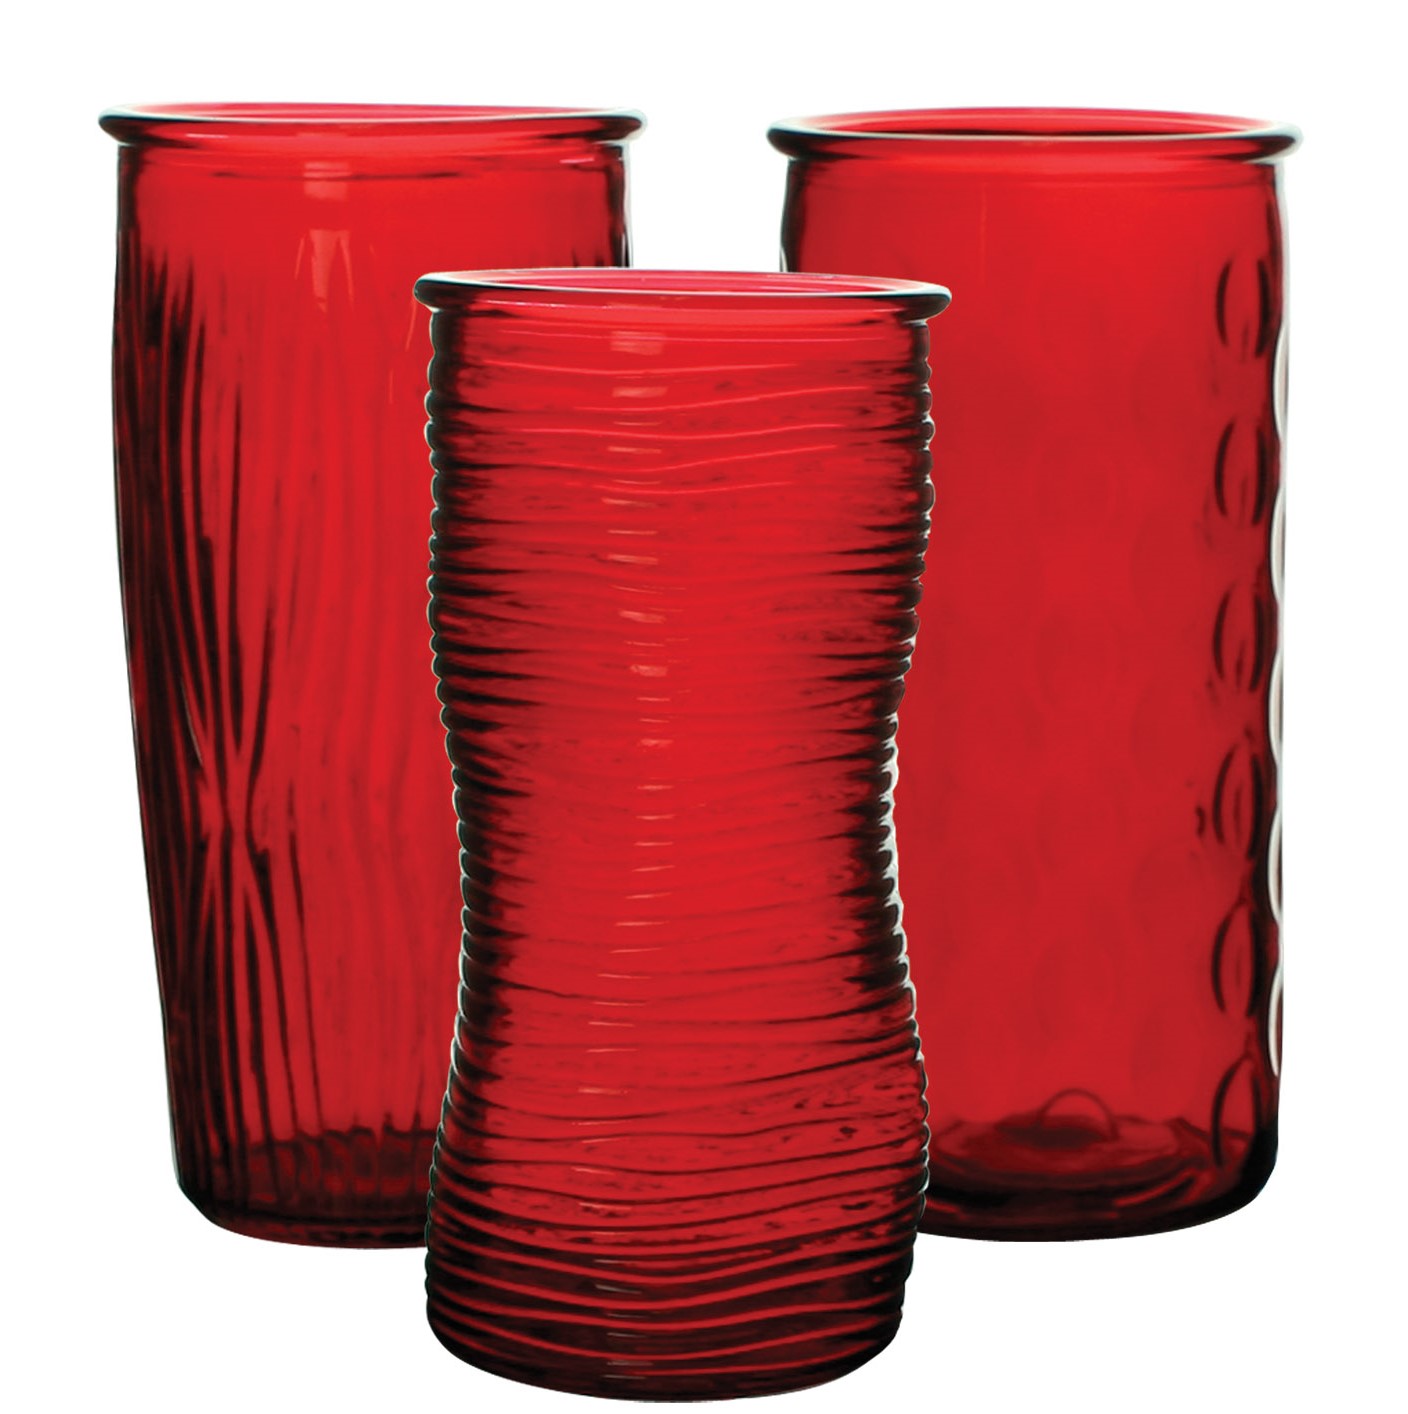 Ruby Red Rose Vase Assortment S/12
4" x 9.75" 